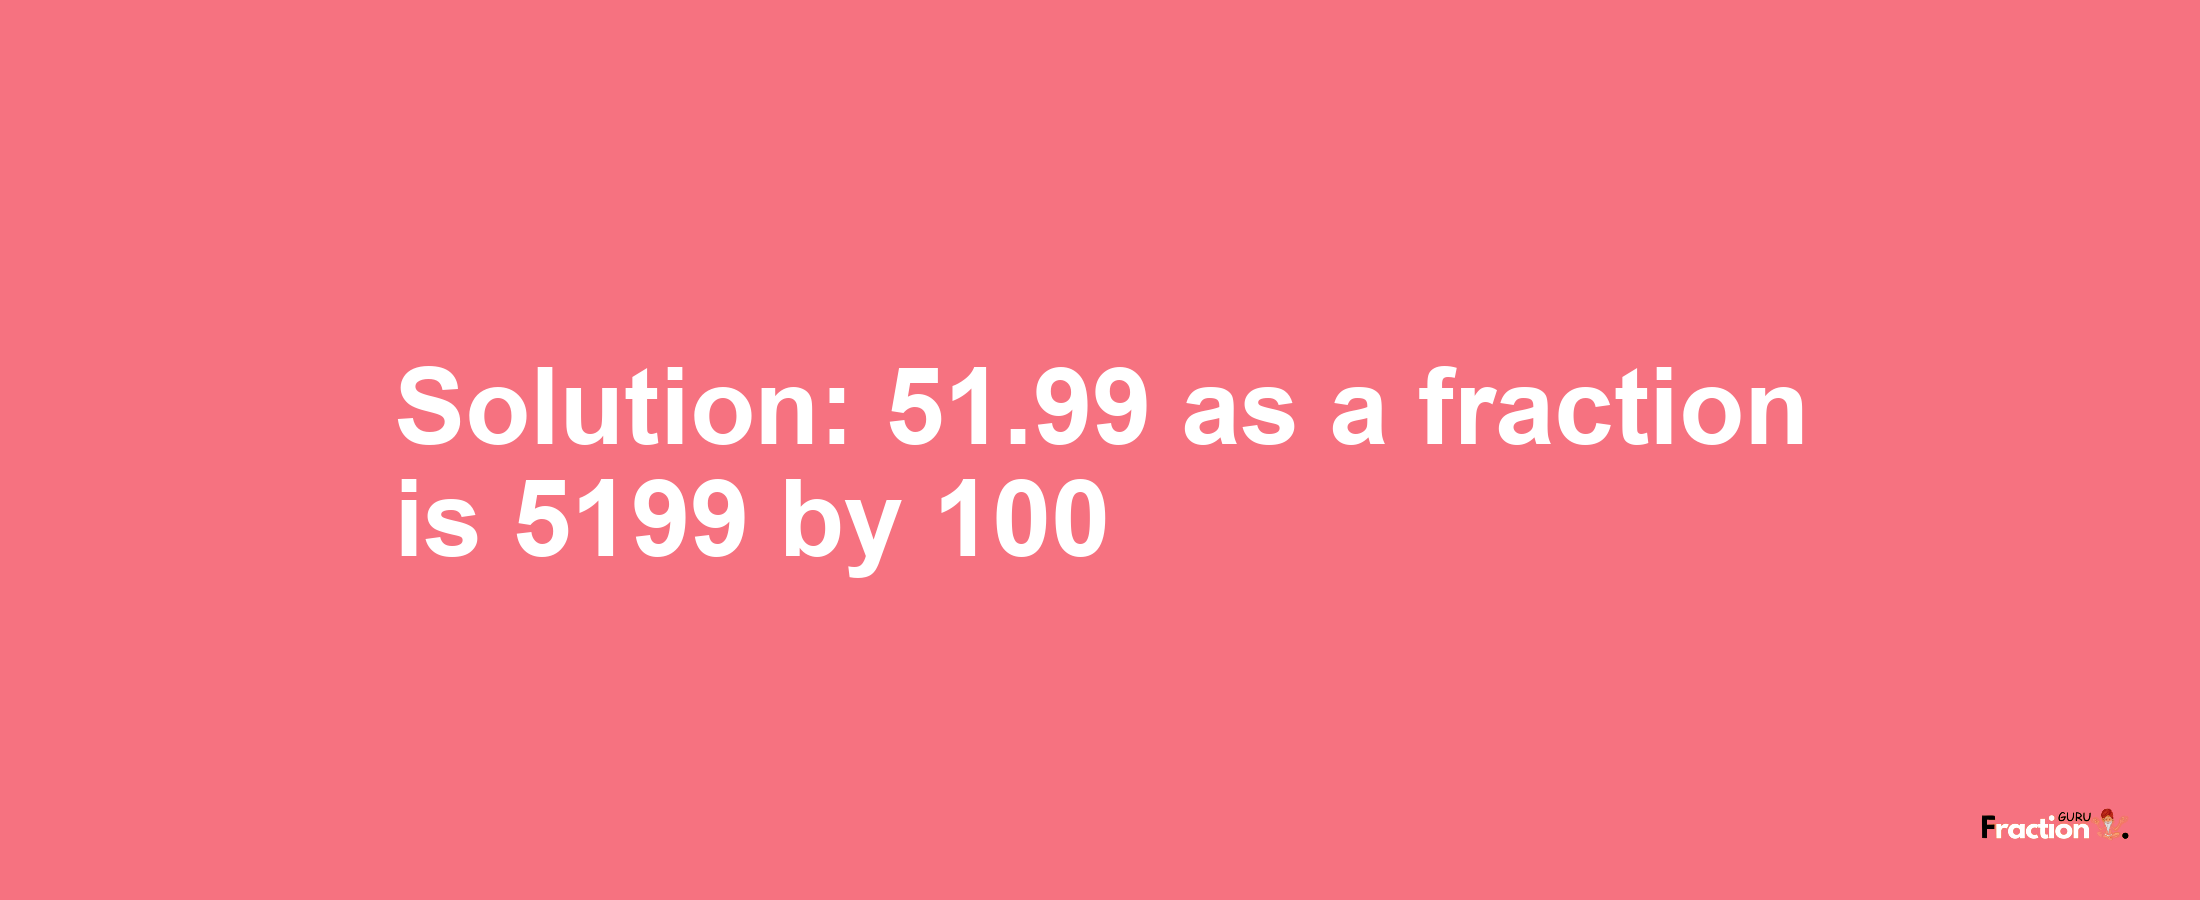 Solution:51.99 as a fraction is 5199/100